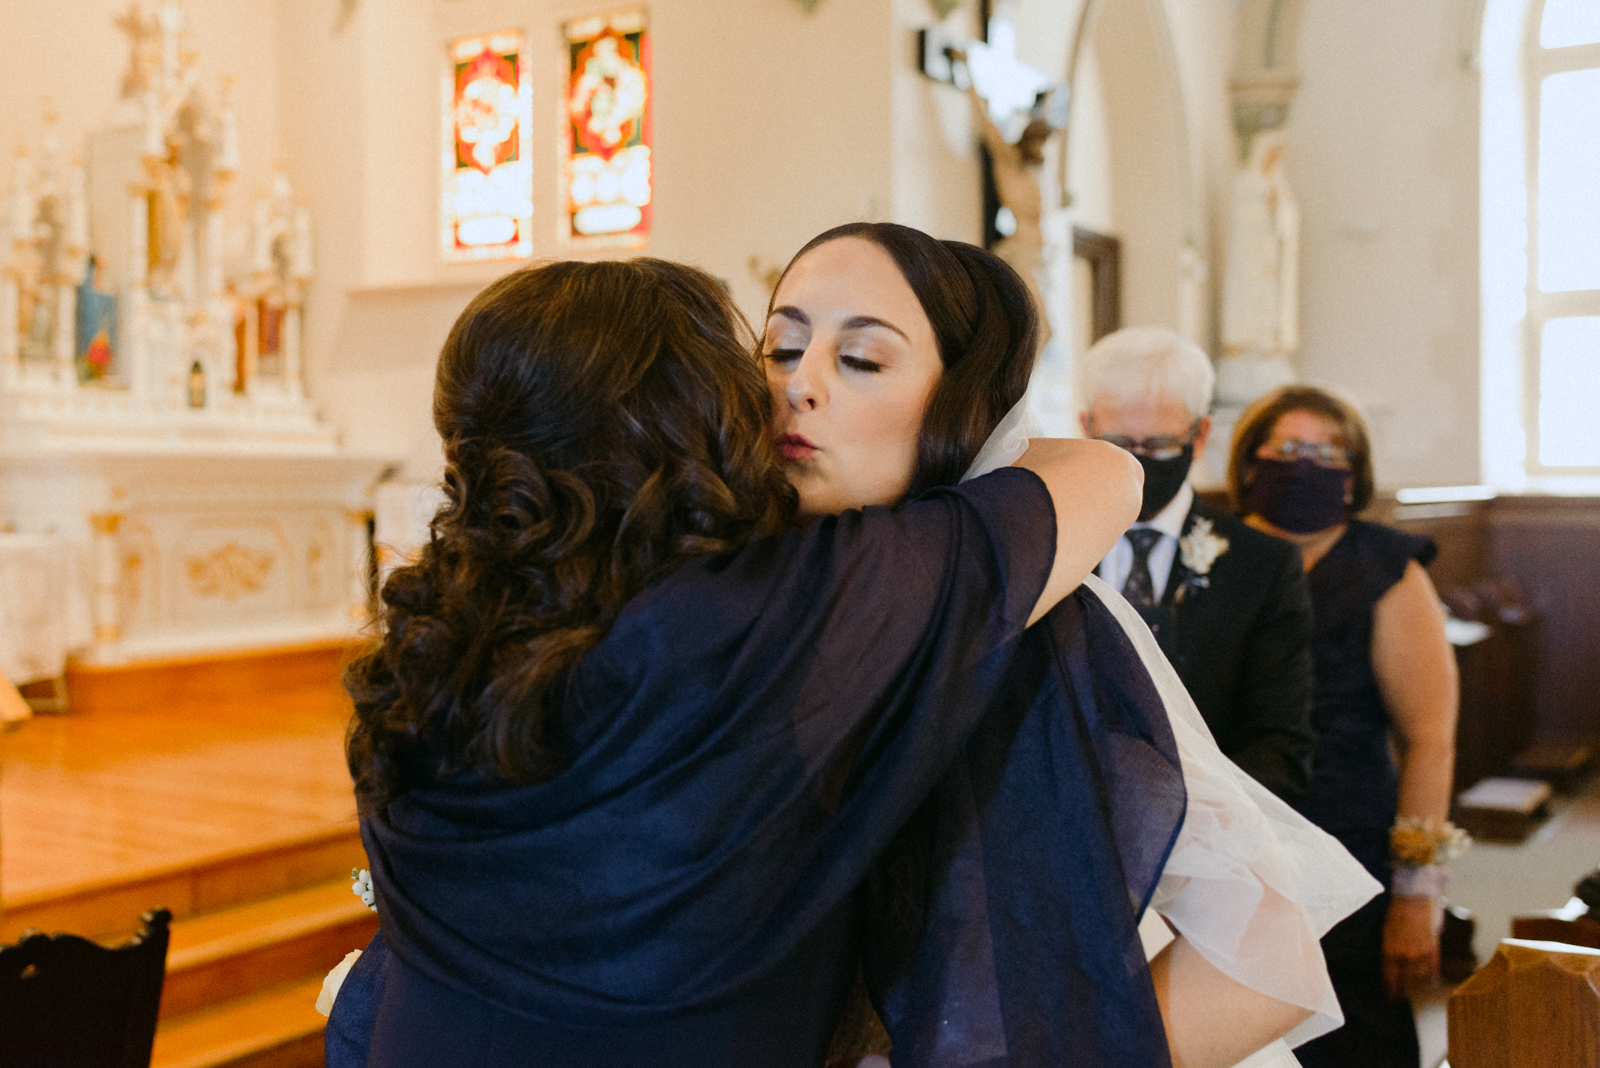 bride kissing her mother at the end of the aisle during church wedding ceremony